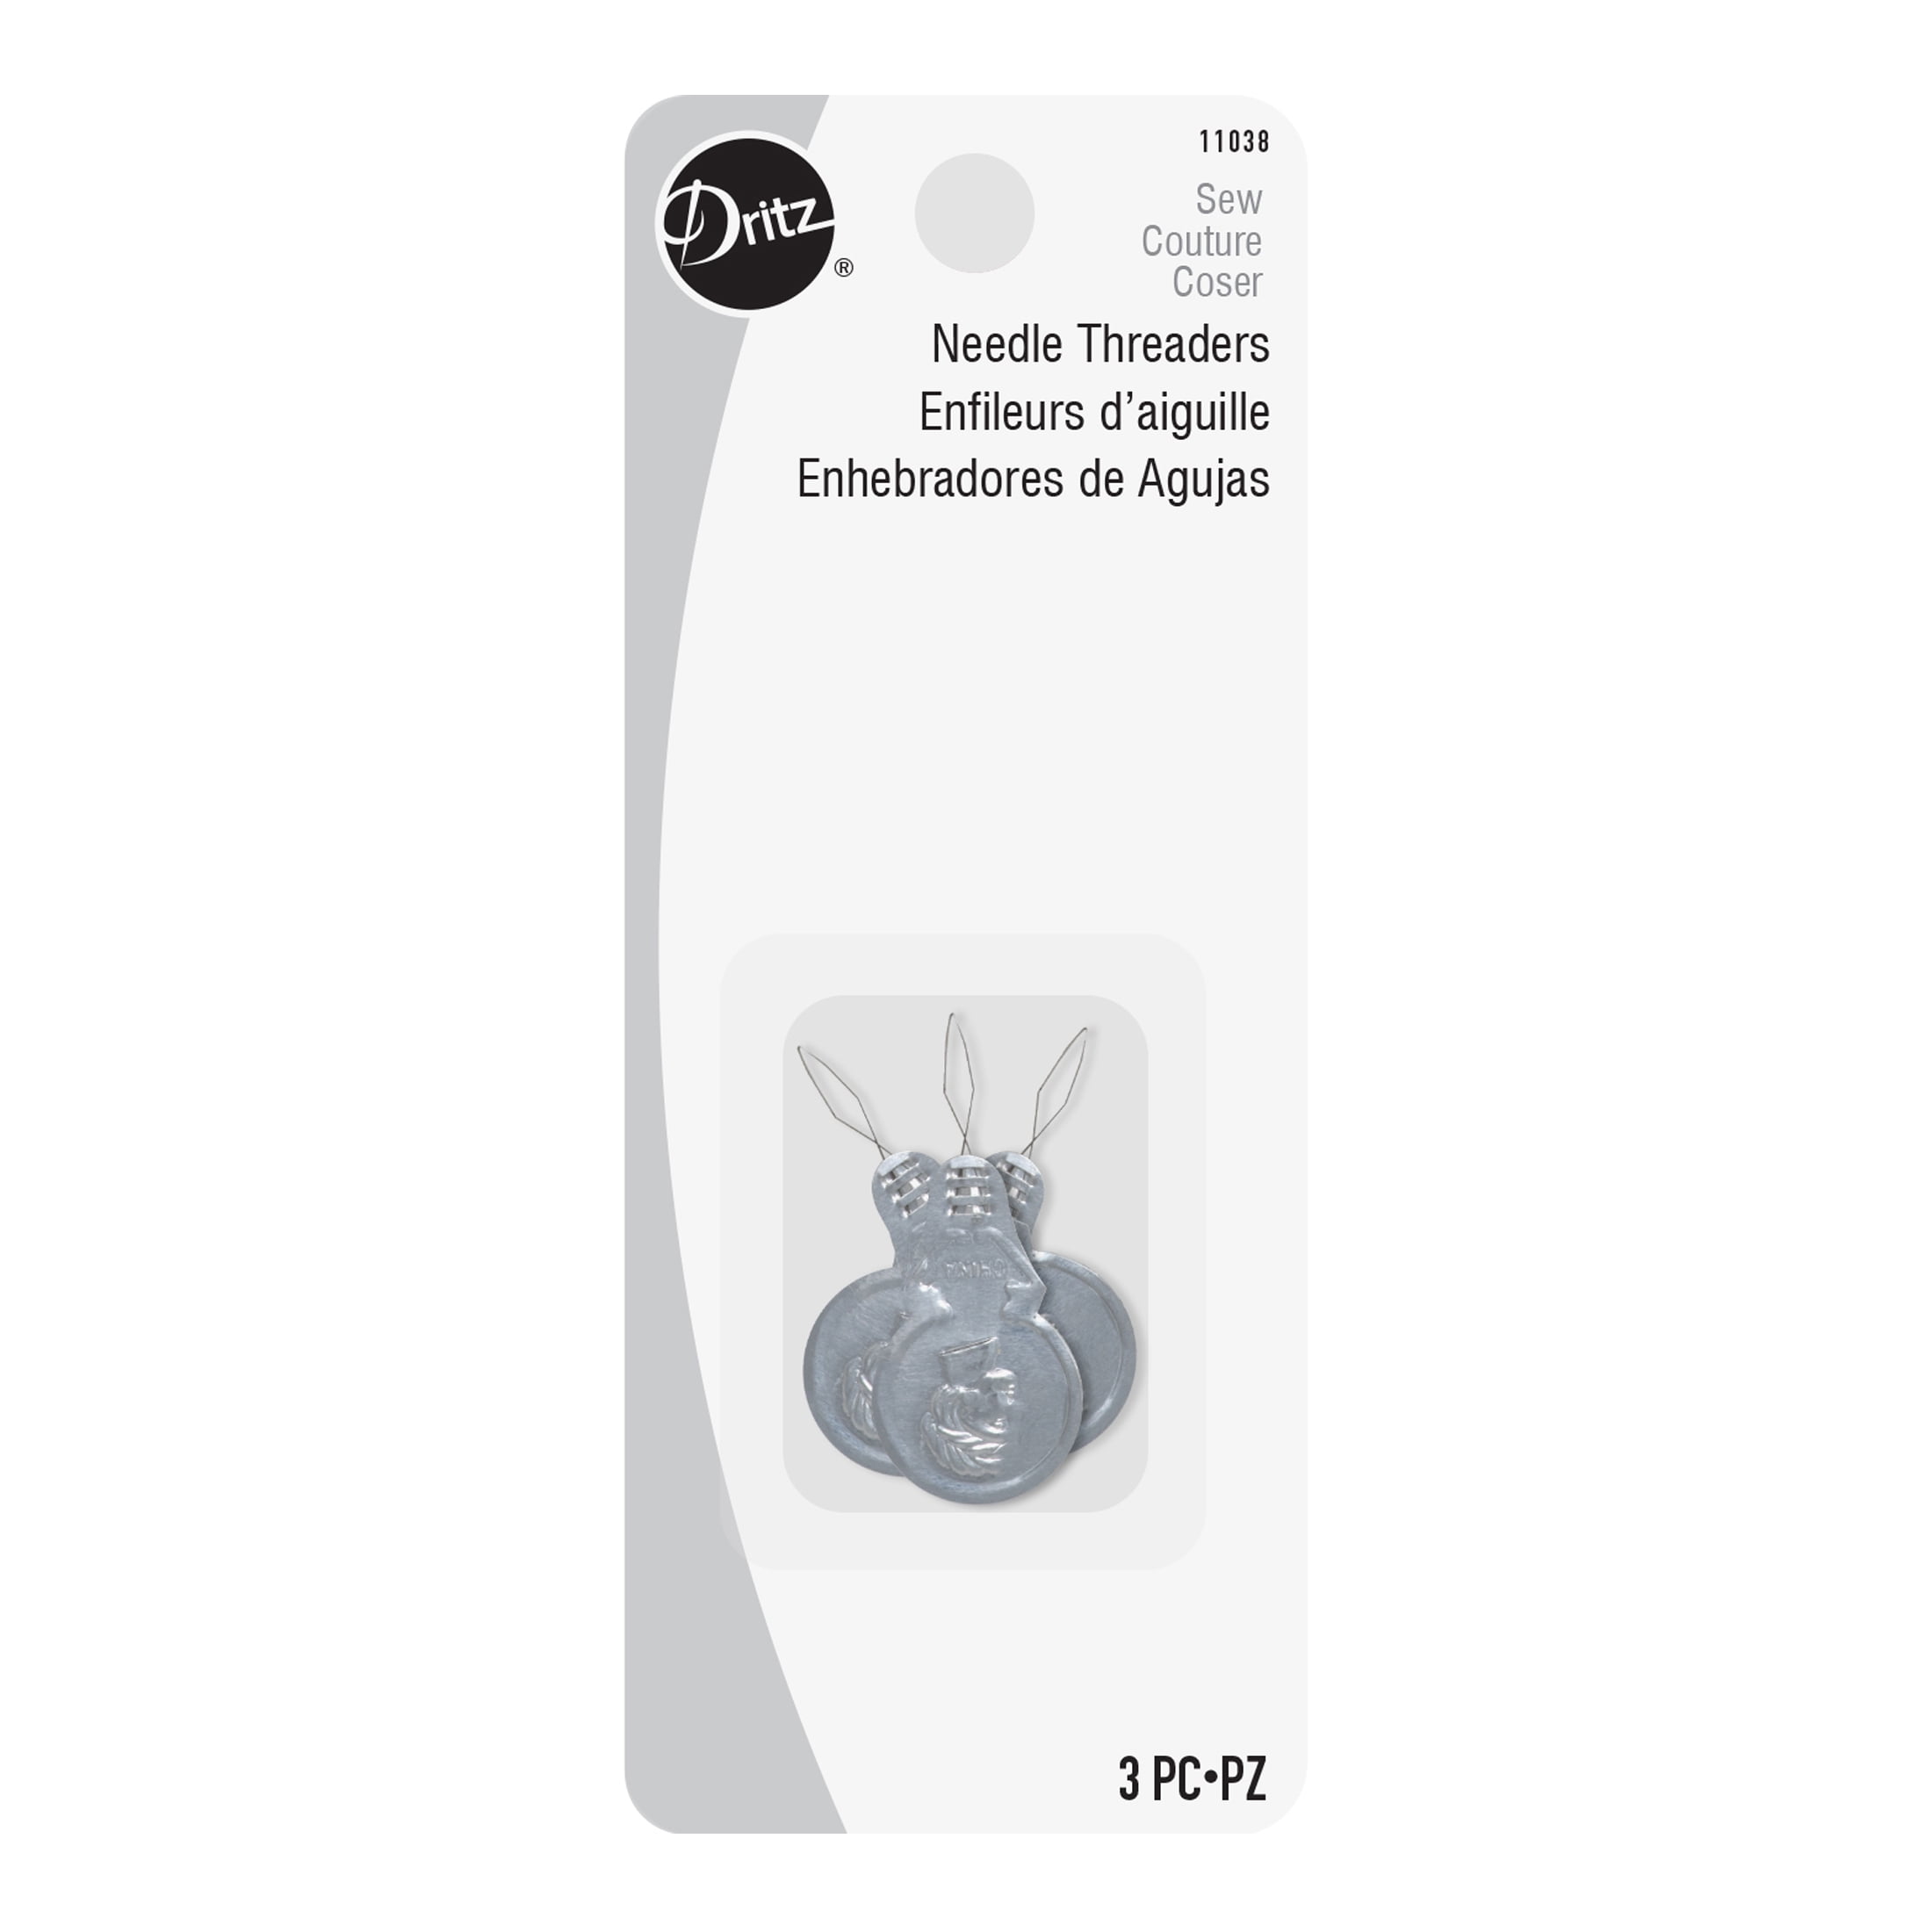 DRITZ Tapestry Needle Threaders option: 1 Pack or 3 for Threading Yarn and  Embroidery Floss 2 Threaders per Package. 10500 